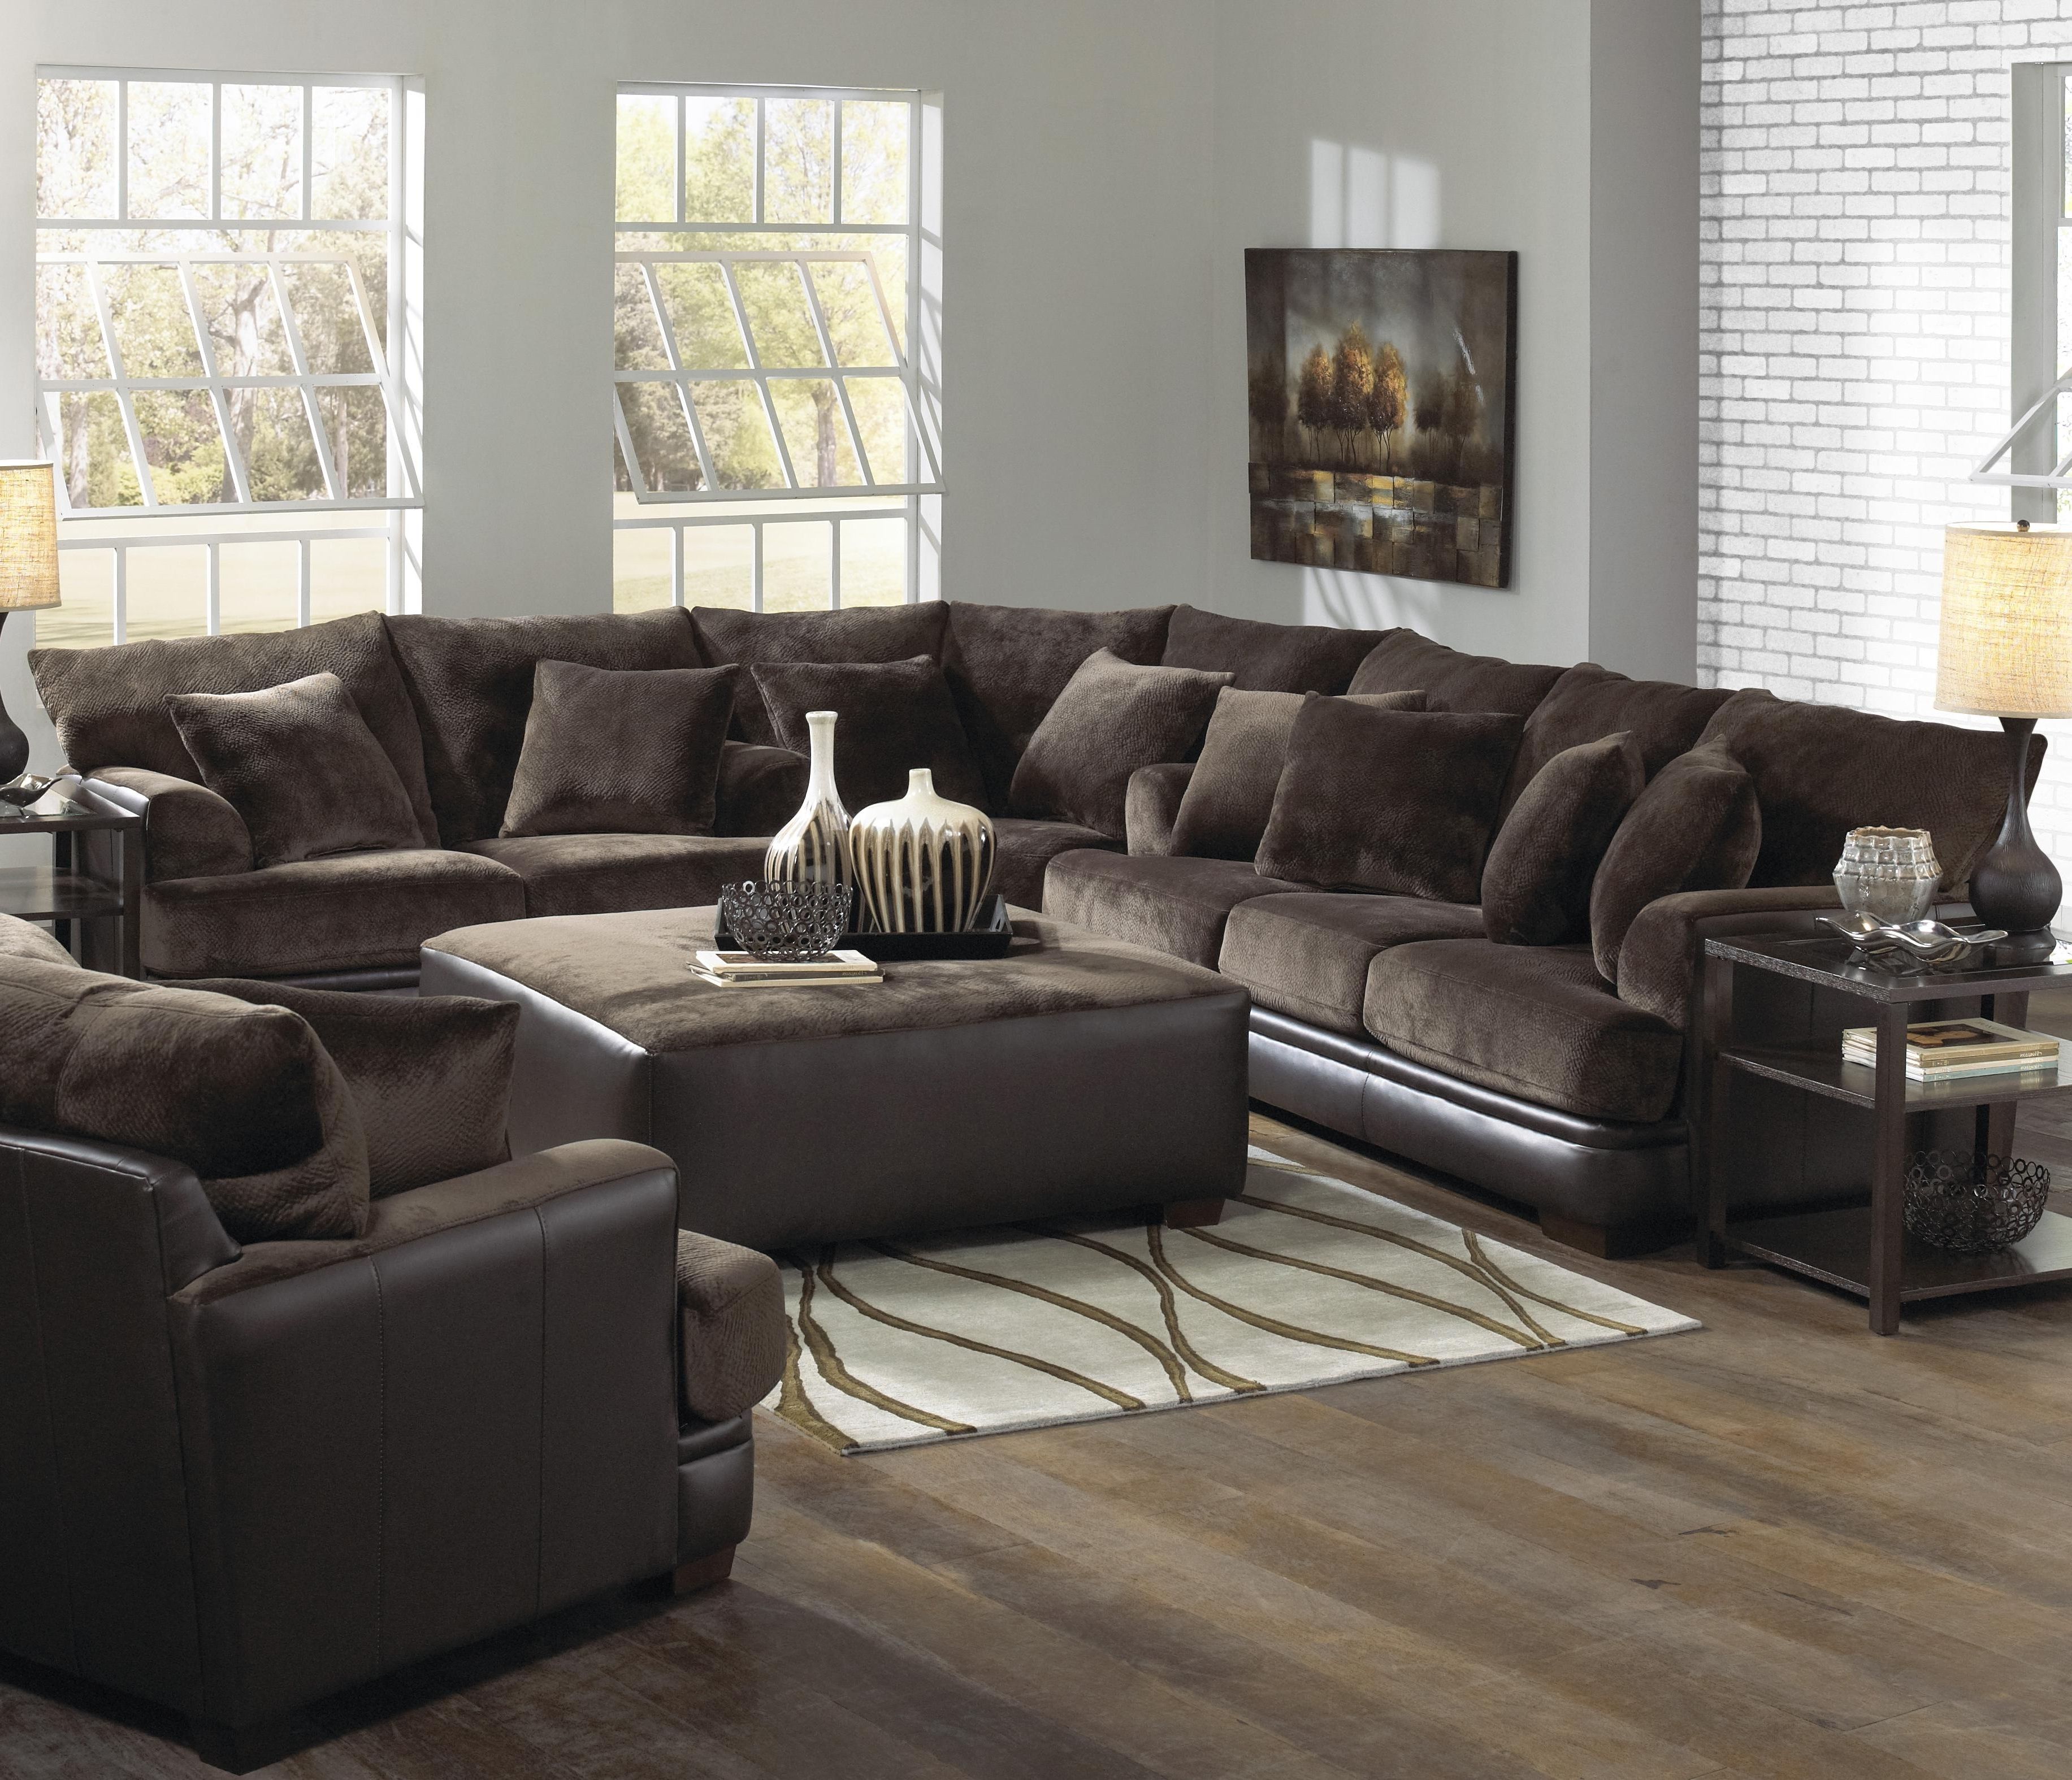 Sofa : Fabric Sectional Leather Sectional U Shaped Sectional With Within Most Up To Date U Shaped Leather Sectional Sofas (View 6 of 20)